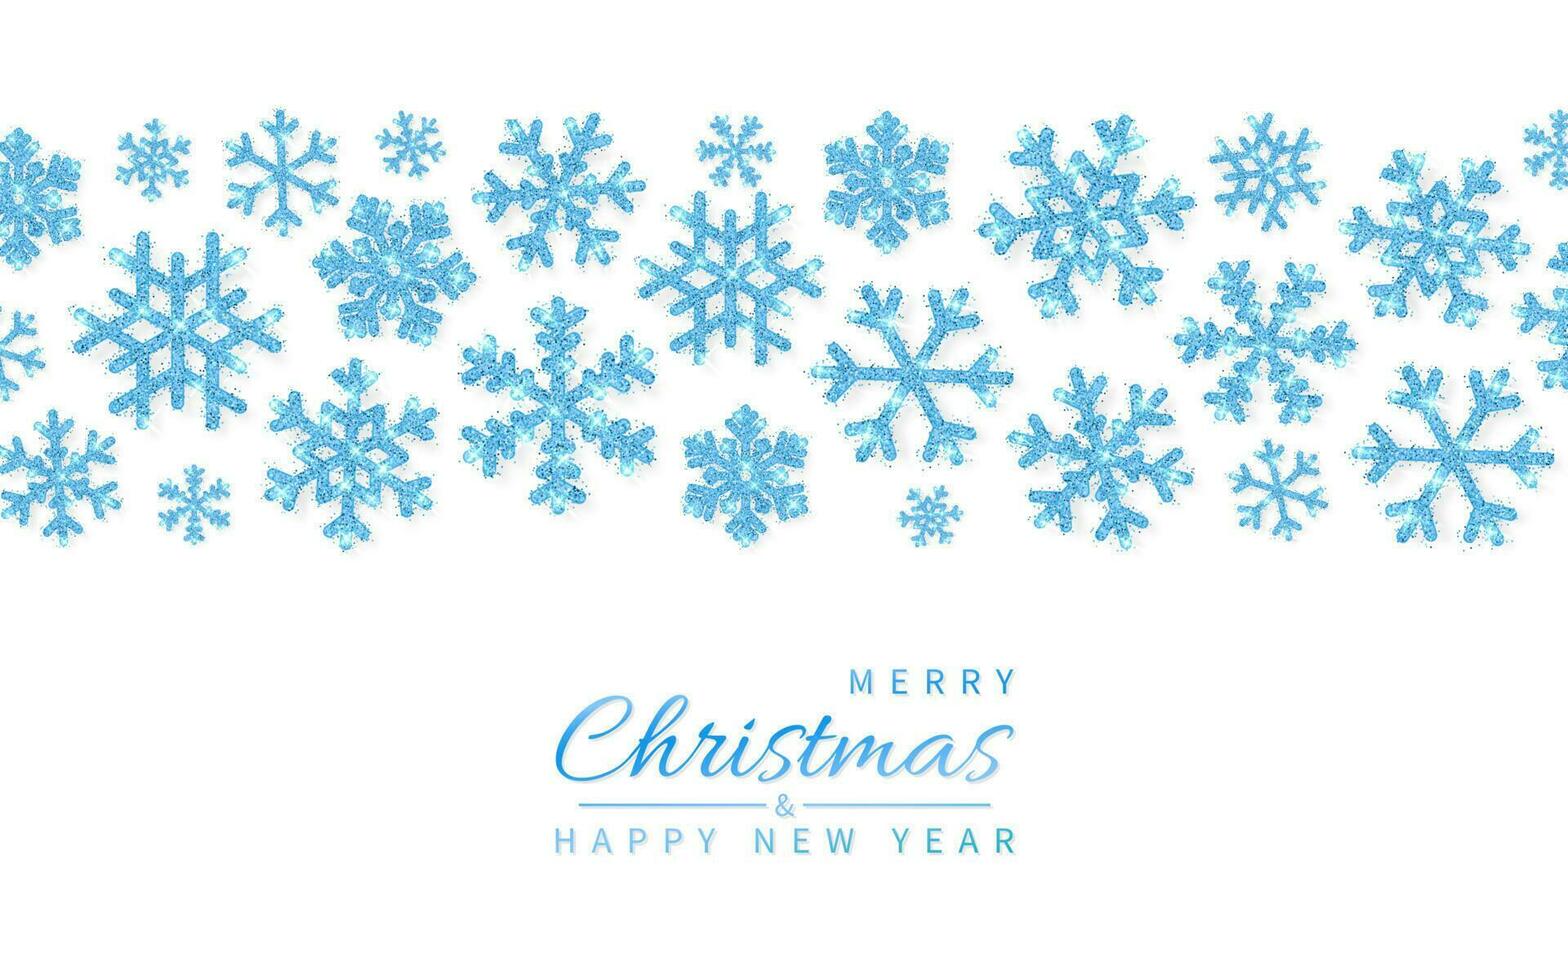 Shining glitter glowing blue snowflakes on white background. Christmas and New Year background. Vector illustration